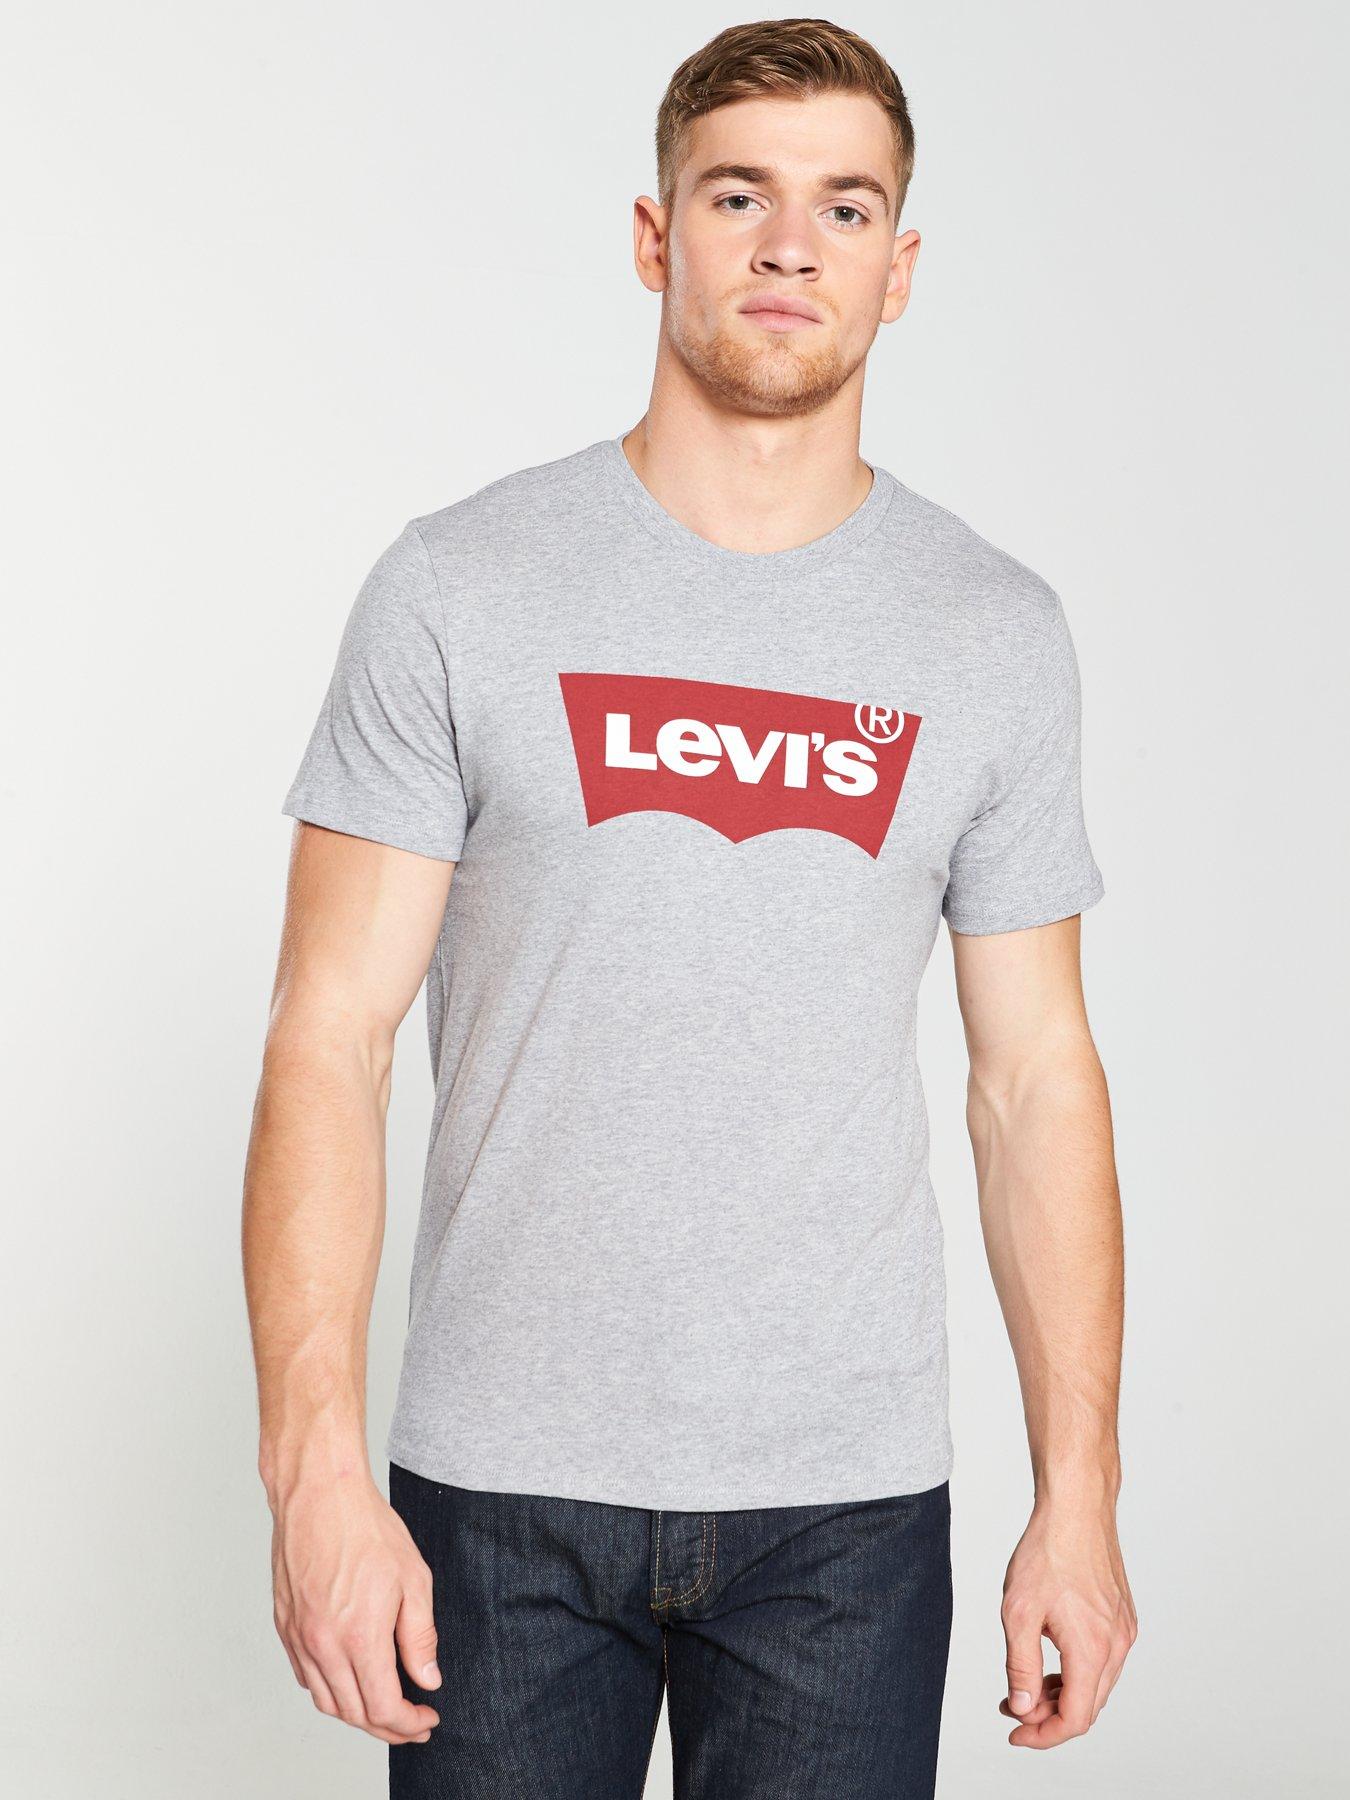 Levi's Batwing Graphic T-Shirt - Grey Heather 